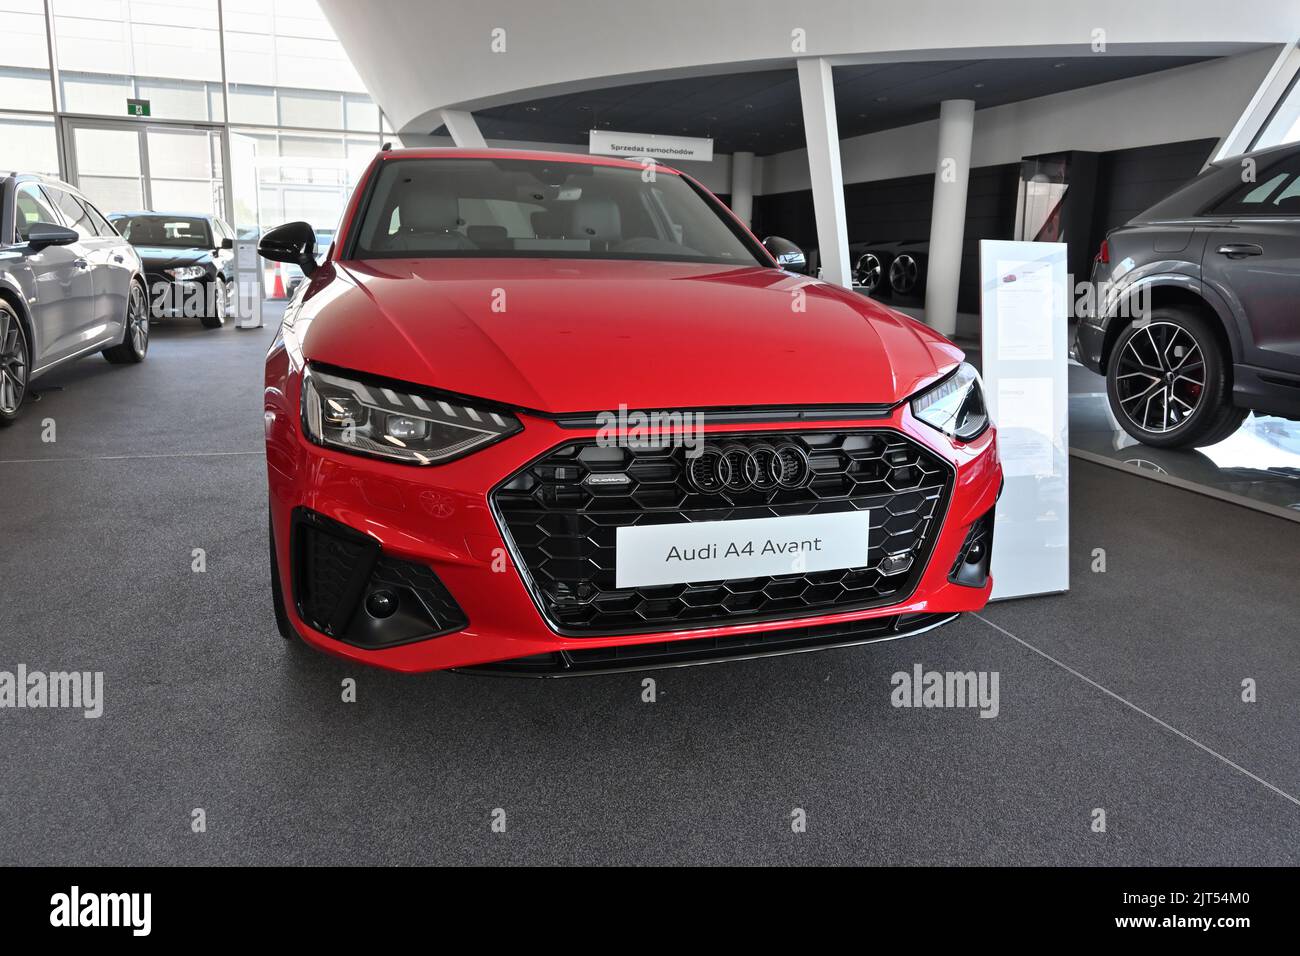 Gdansk, Poland - August 27, 2022: New model of Audi A4 Avant presented in the car showroom of Gdansk Stock Photo